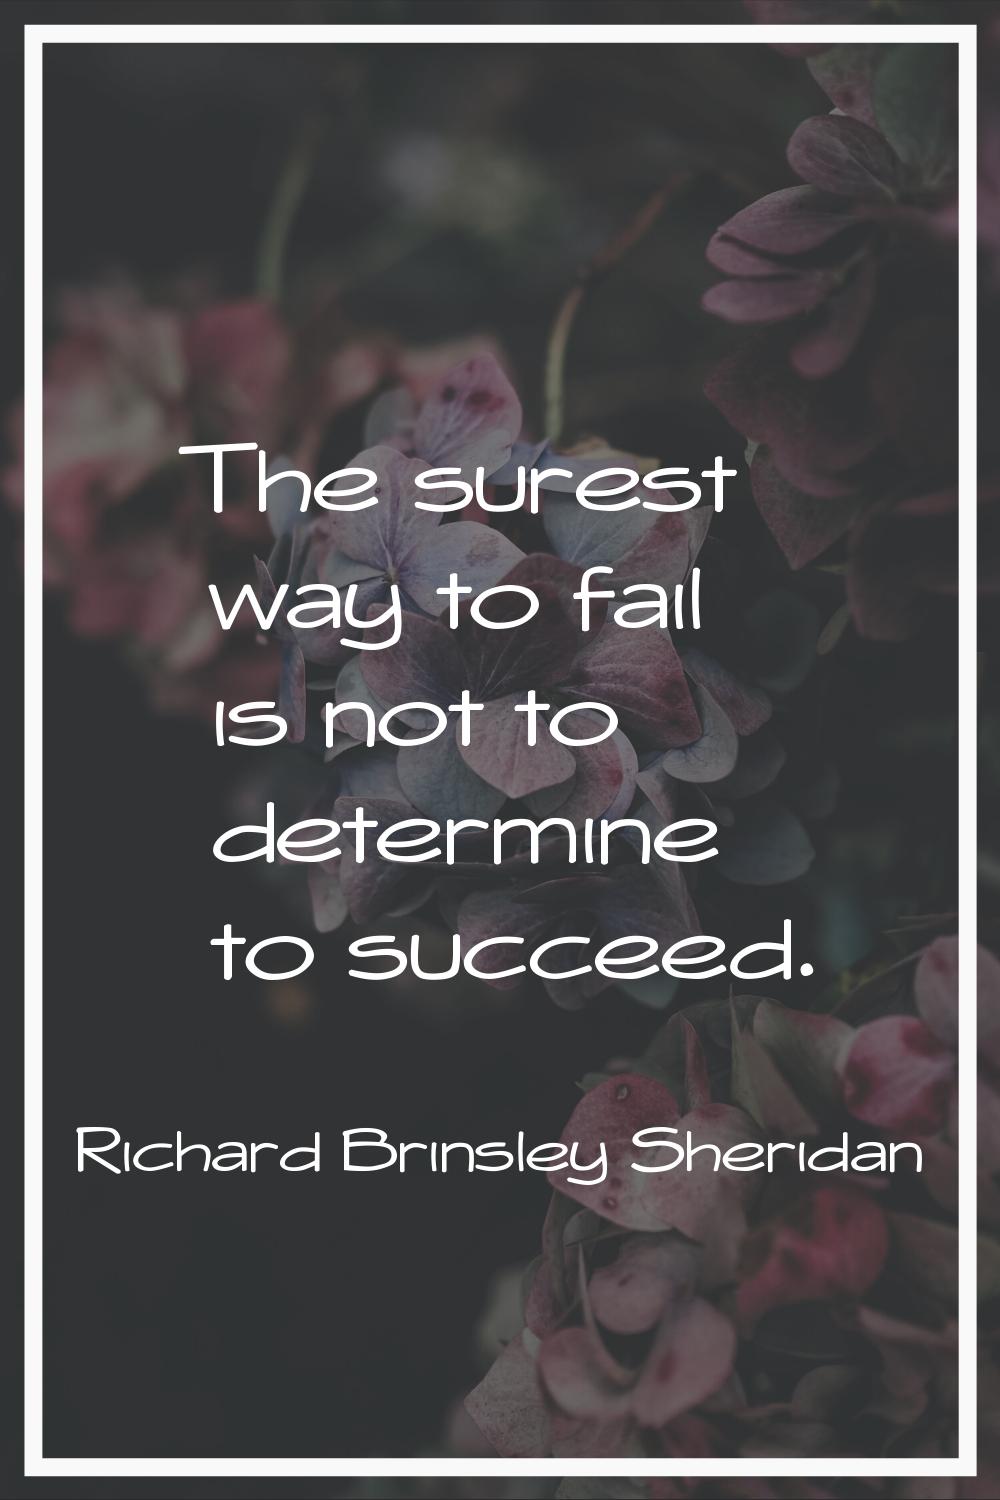 The surest way to fail is not to determine to succeed.